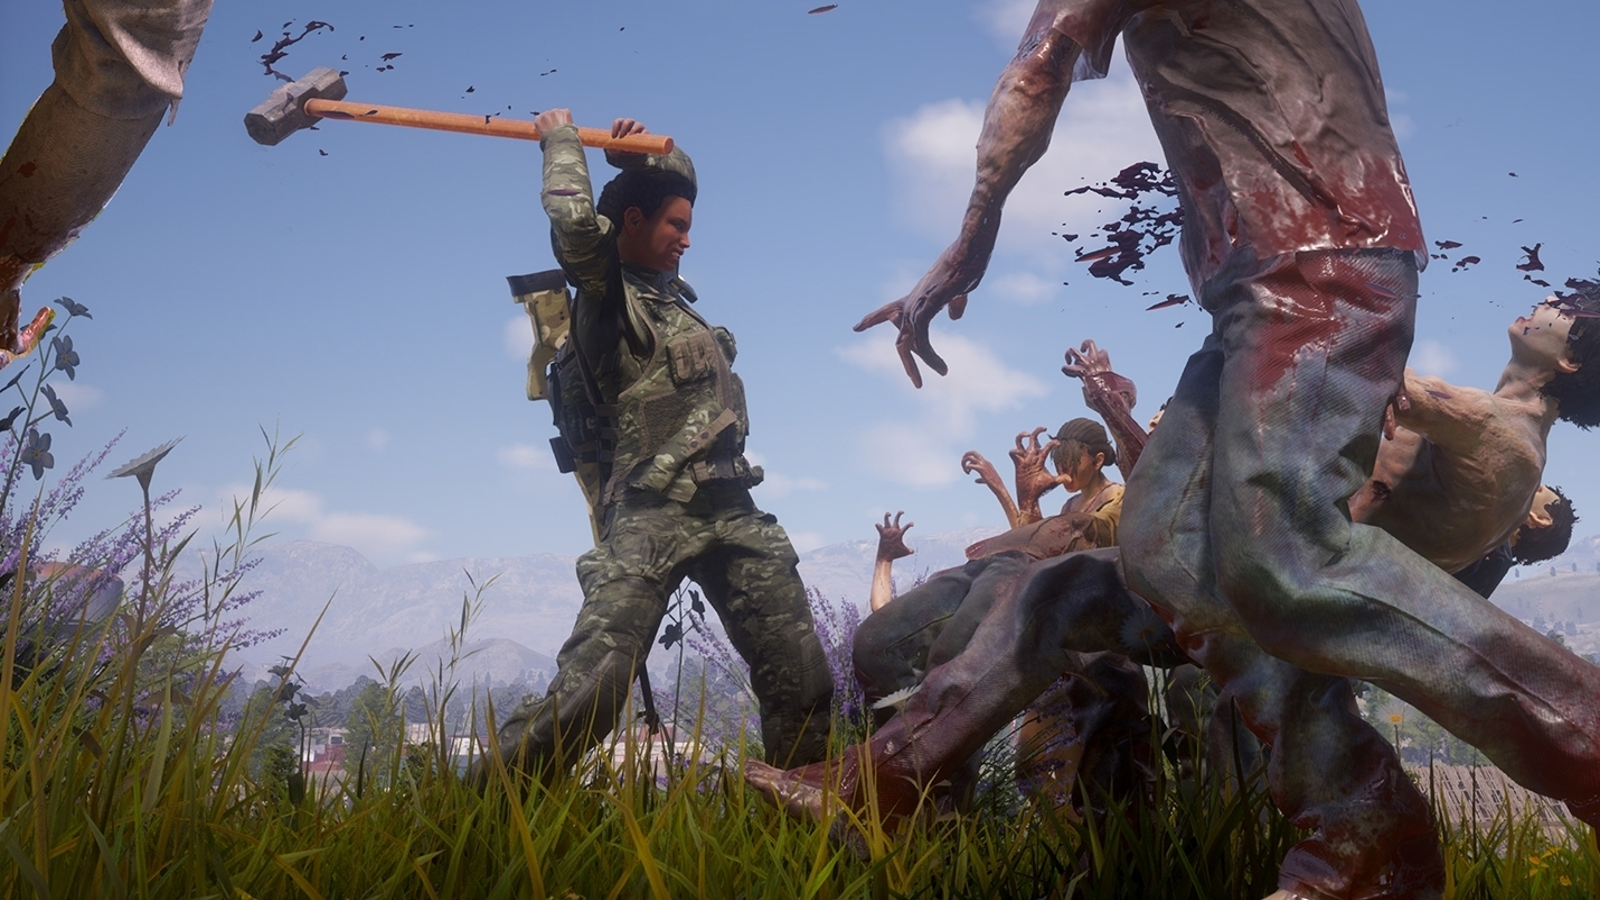 State of Decay 2 has an early 2020 release date on Steam